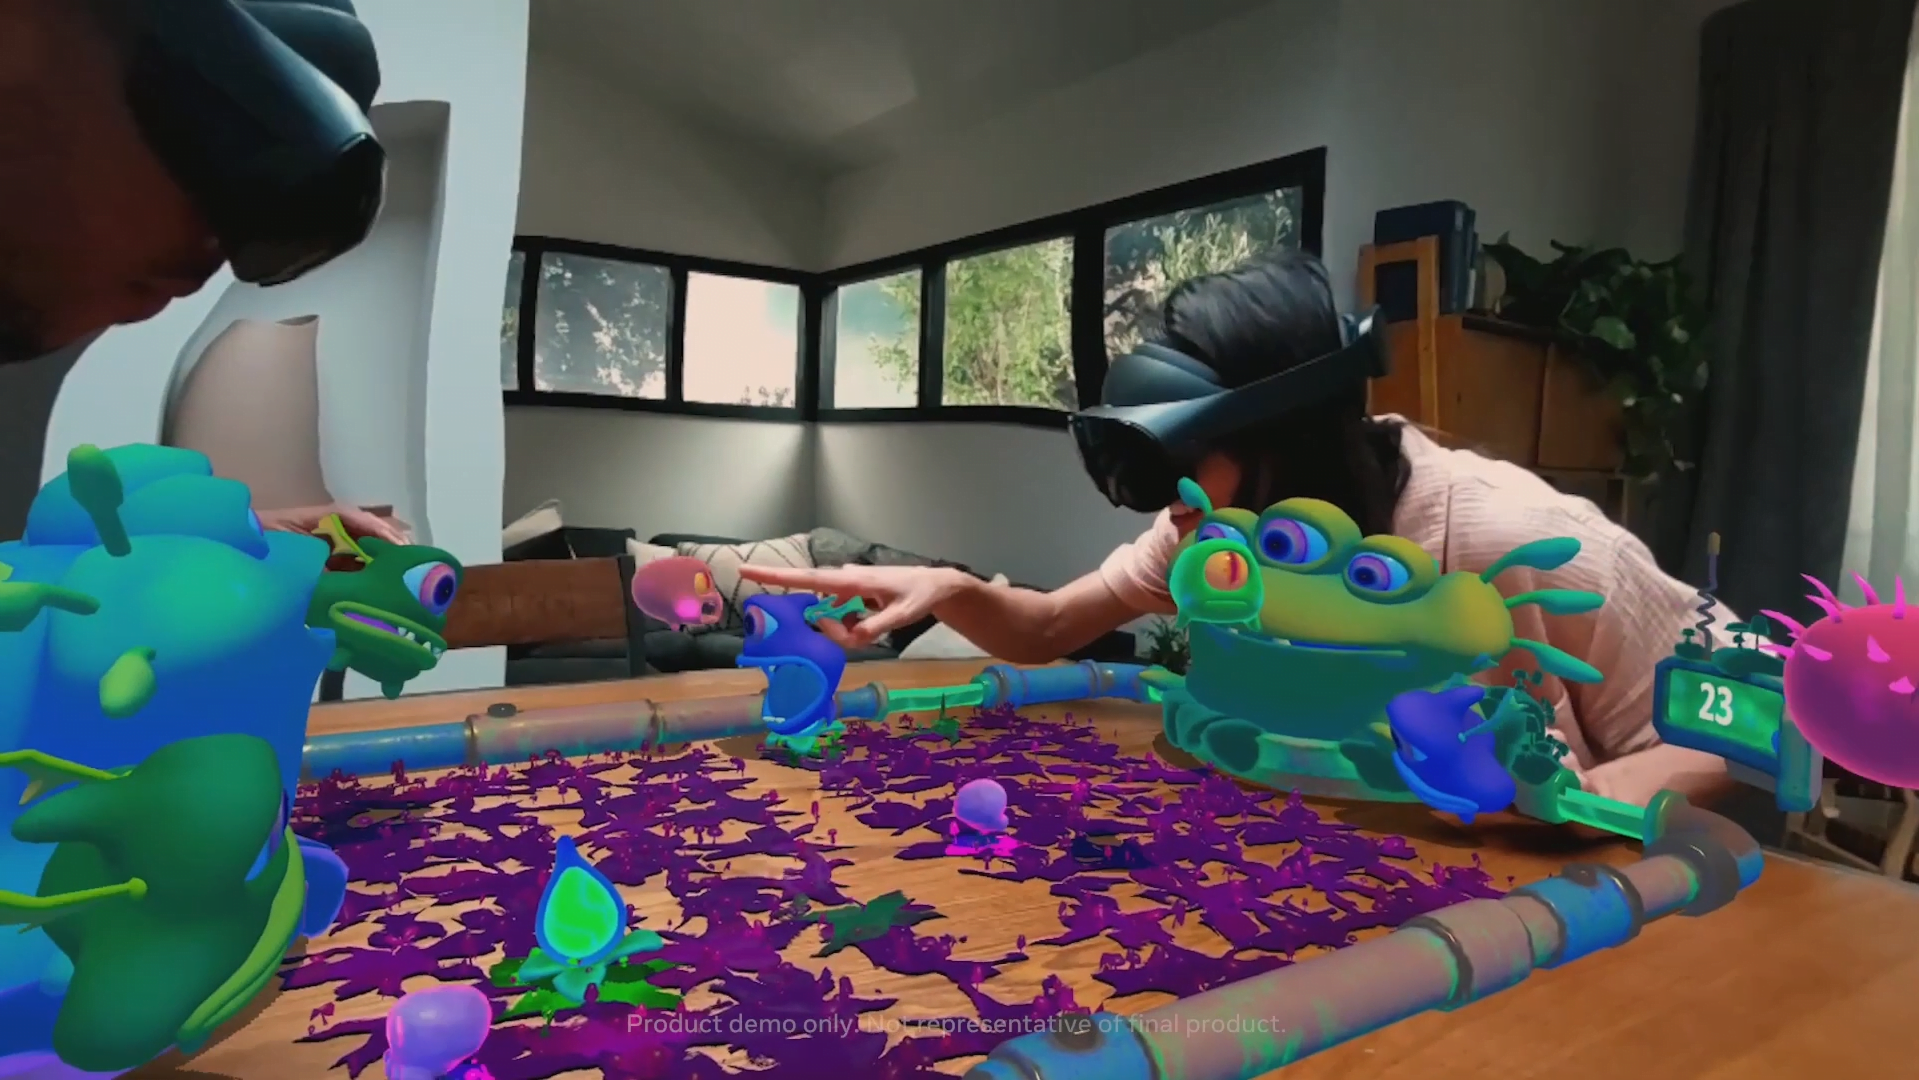 Slimeball! for Quest Pro demonstrates all mixed reality features